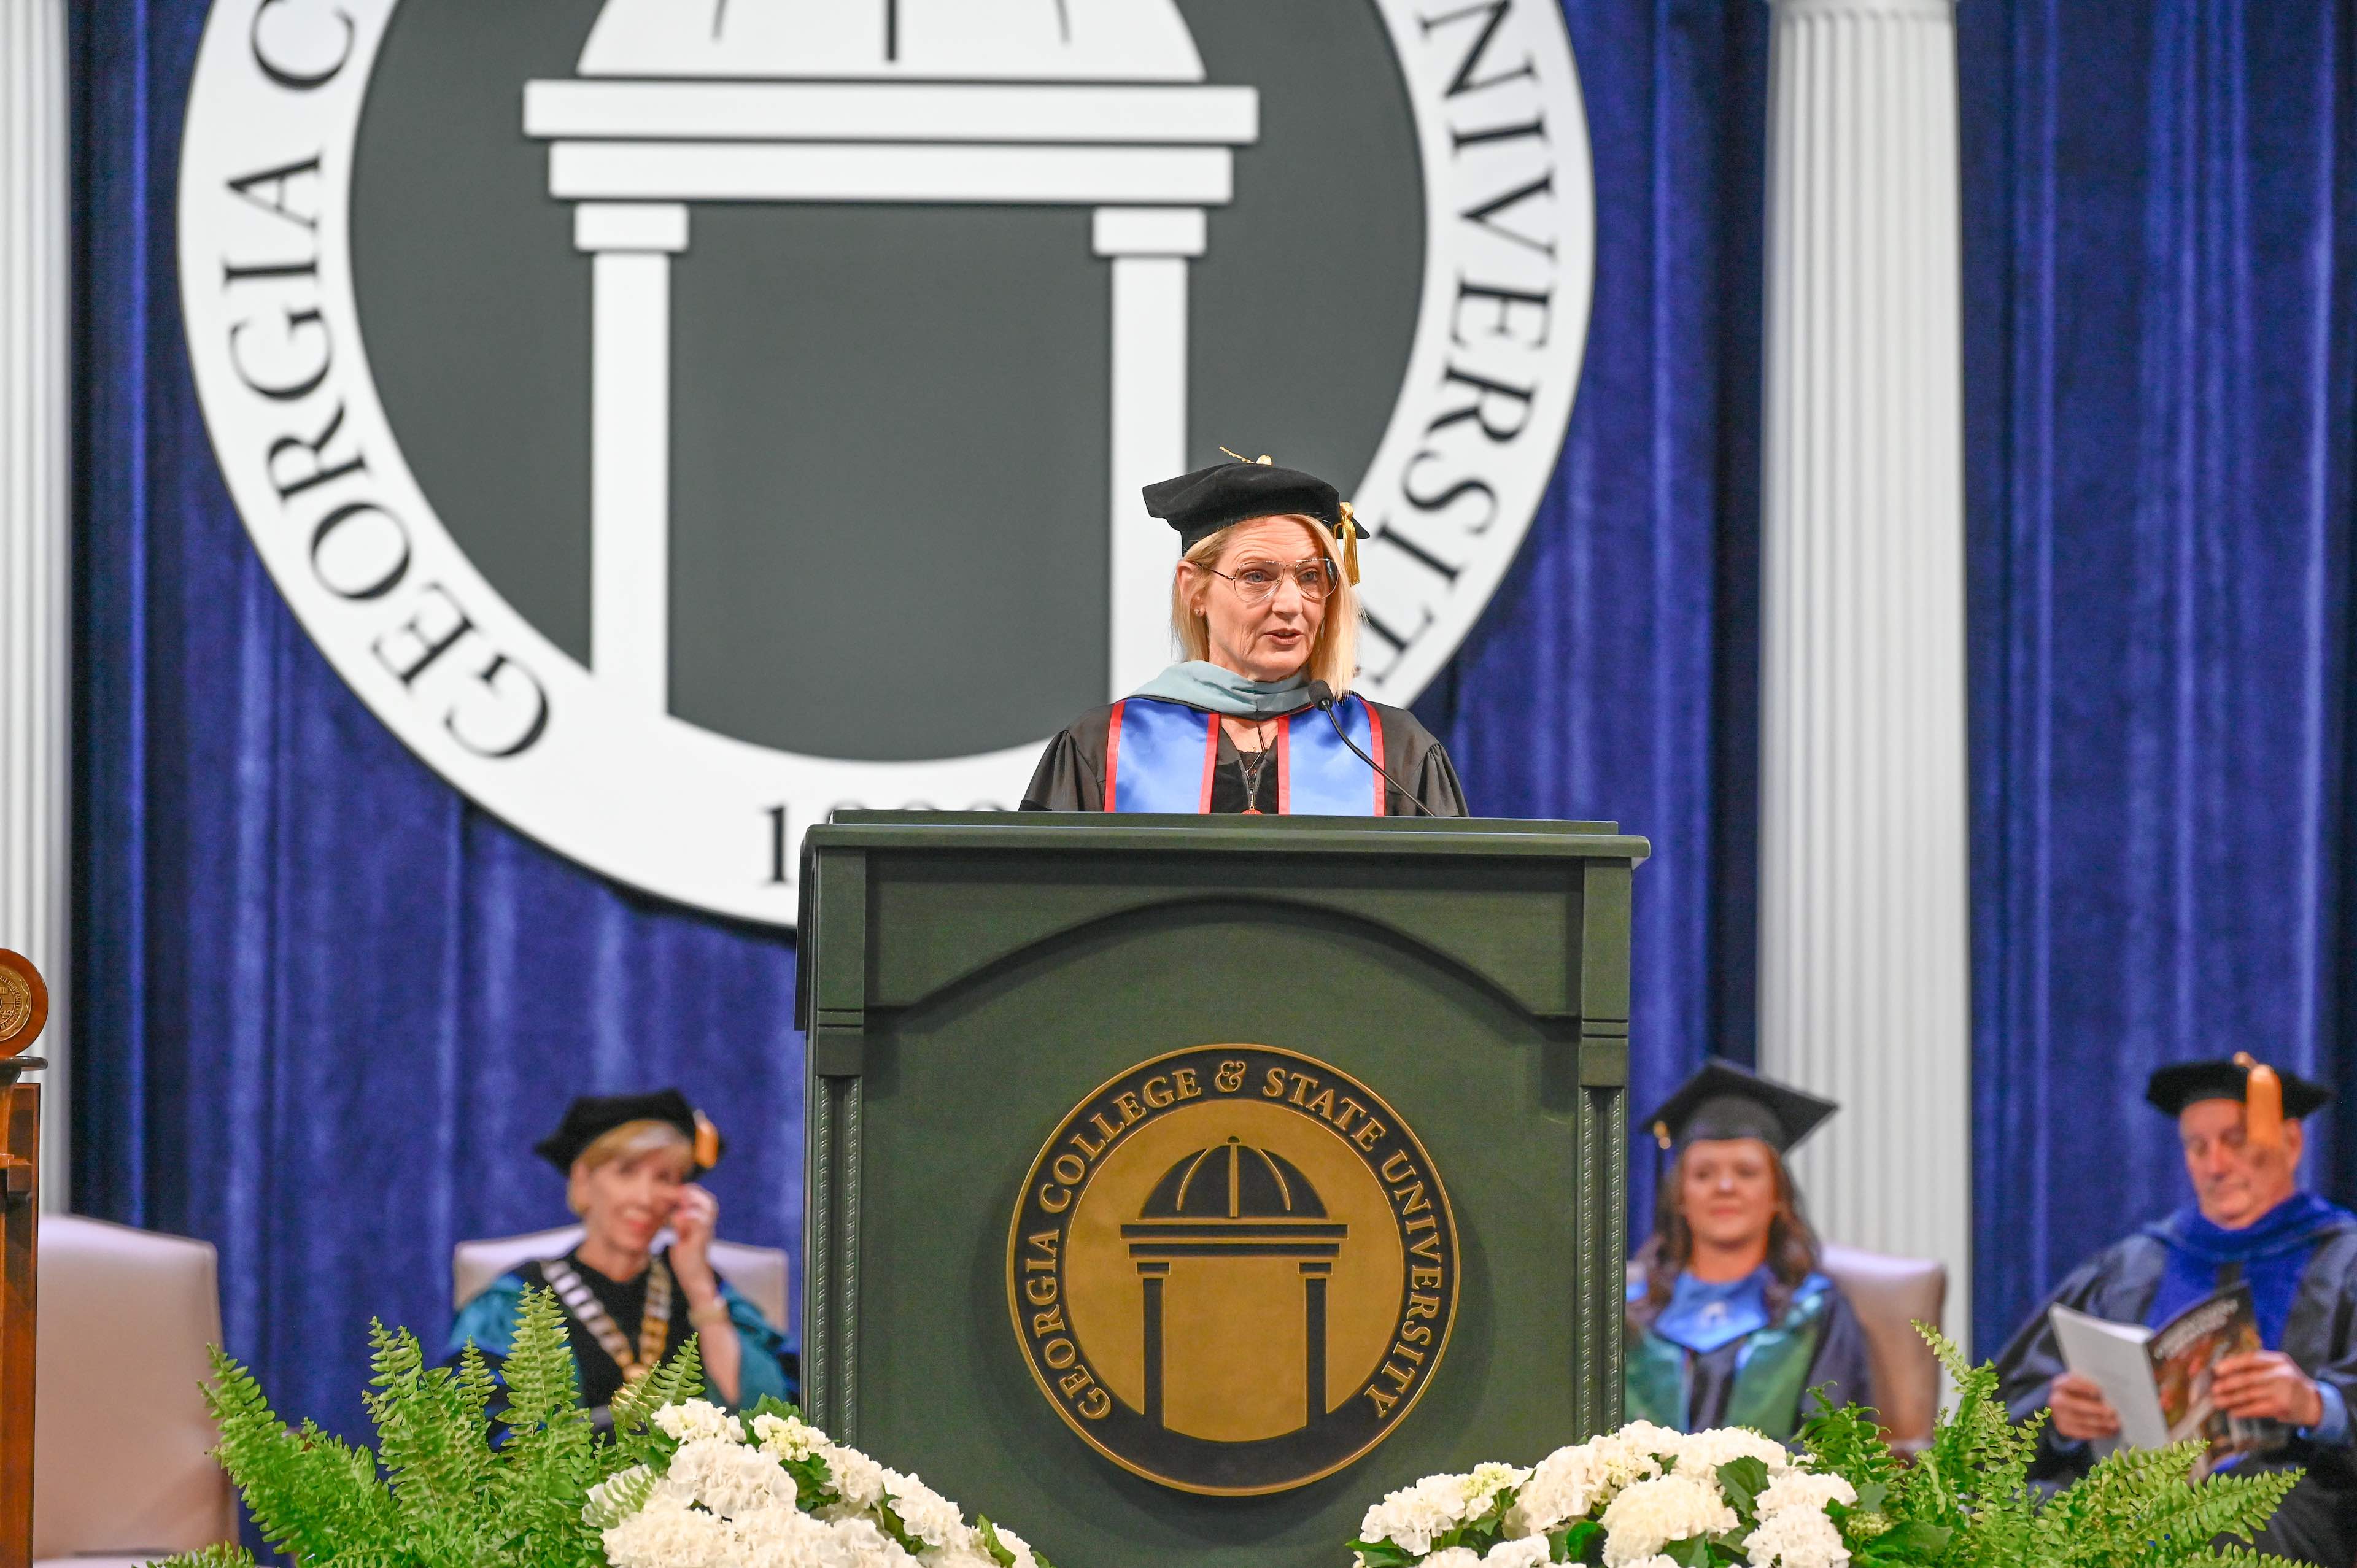 Image for Lee County education leader gives keynote address at GCSU commencement